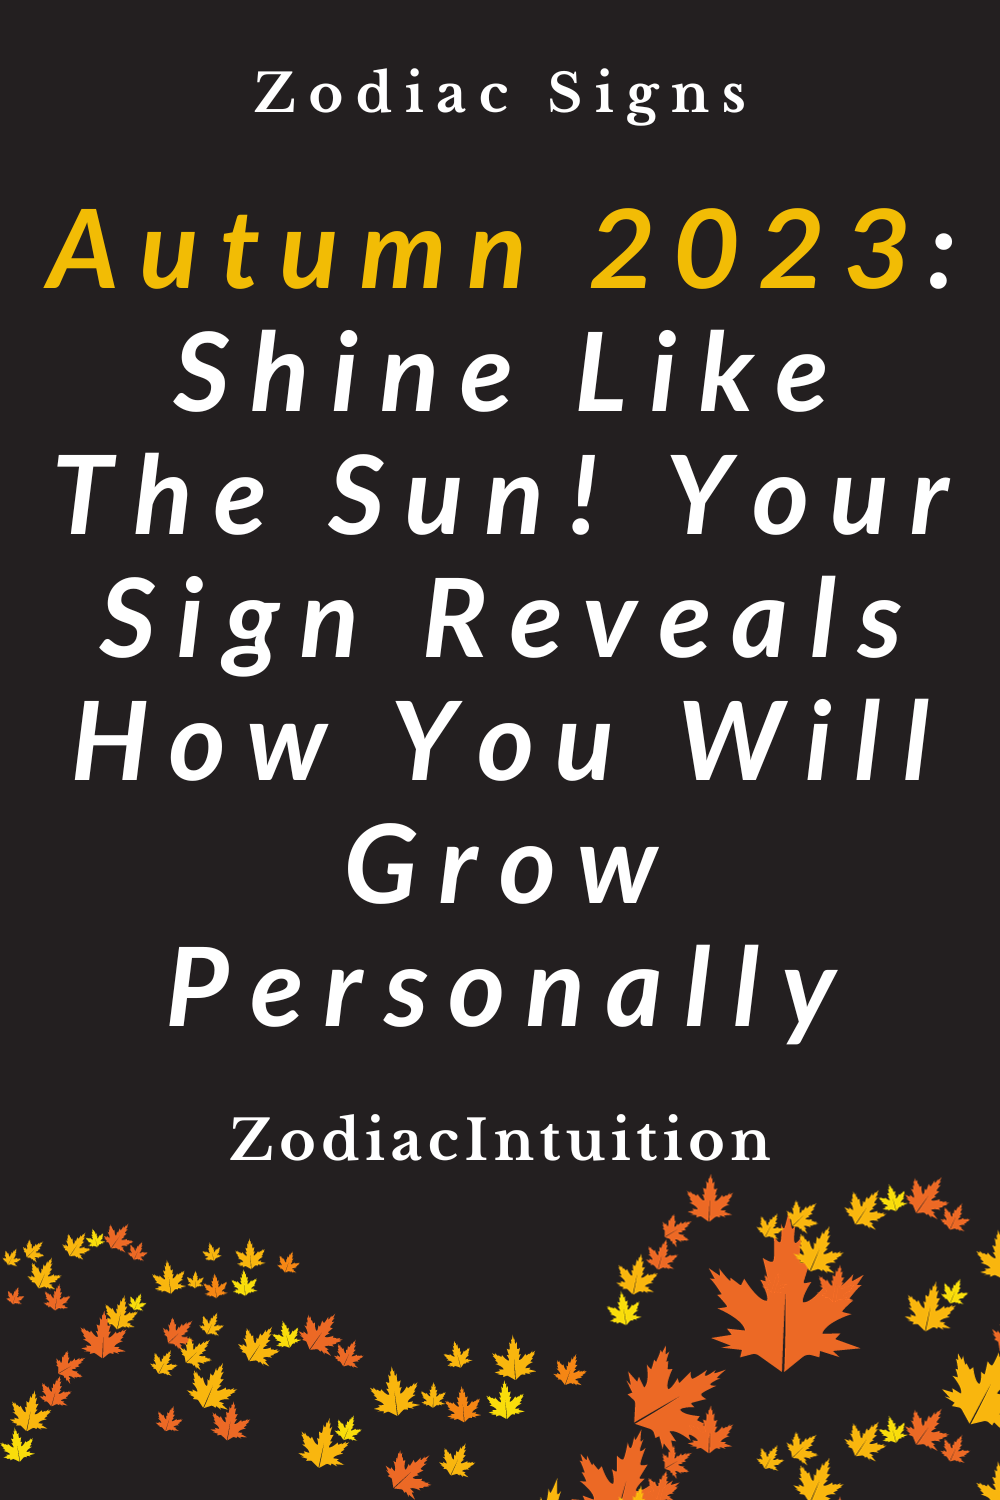 Autumn 2023: Shine Like The Sun! Your Sign Reveals How You Will Grow Personally